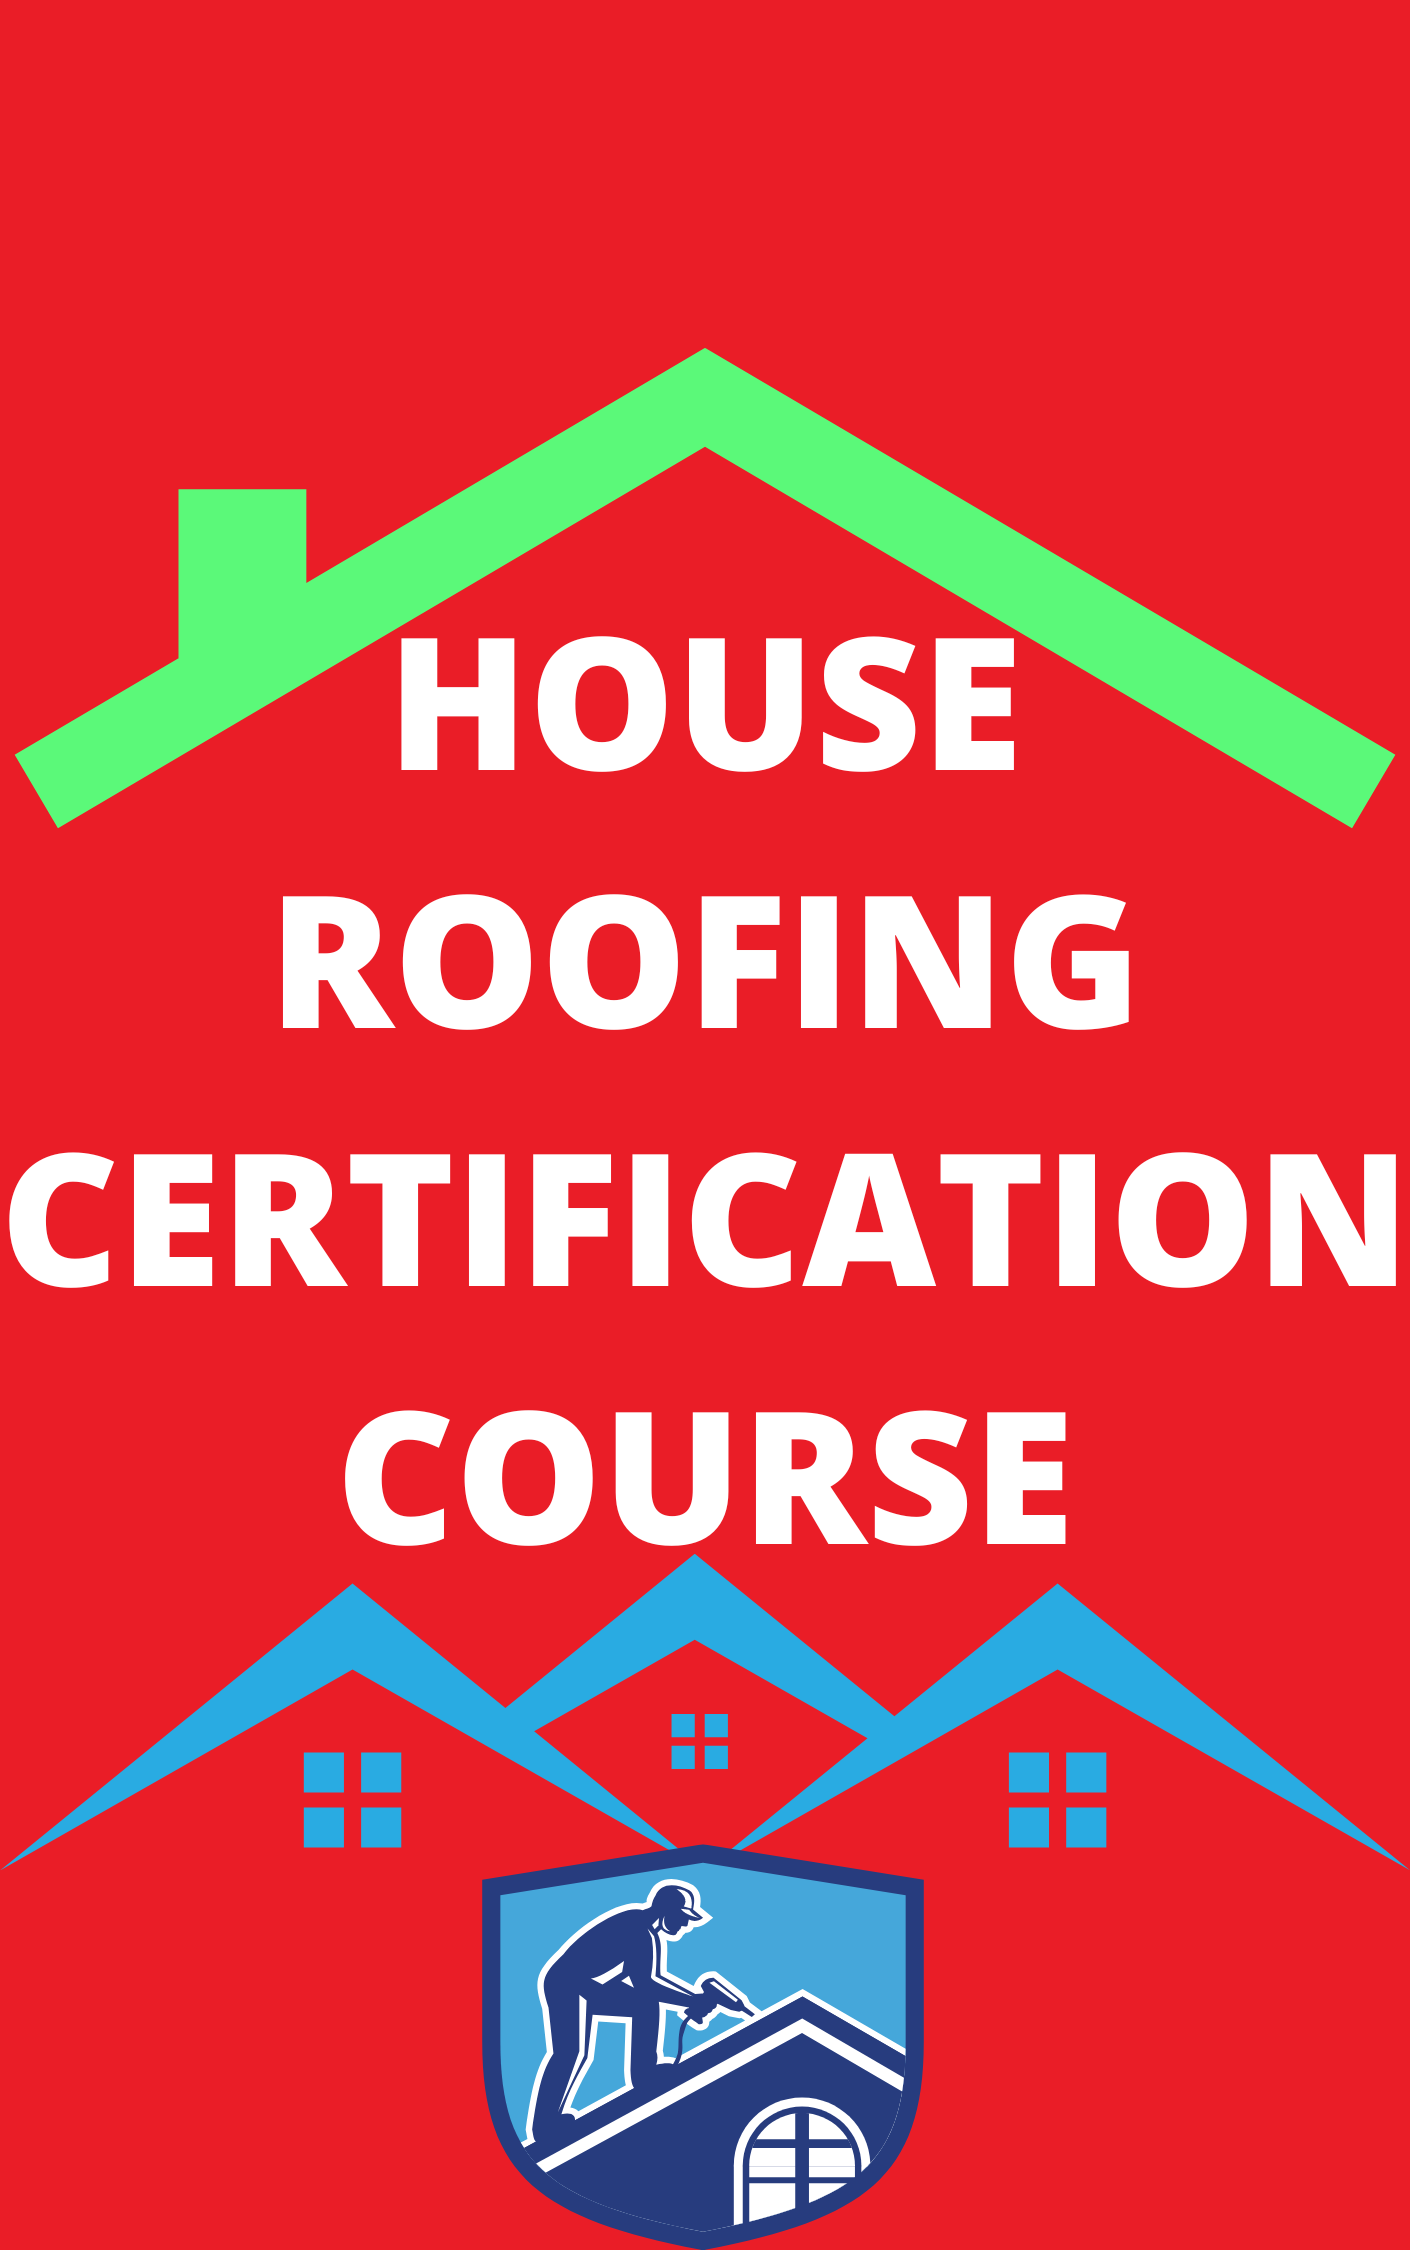 HOUSE ROOFING TRADE CERTIFICATION COURSE